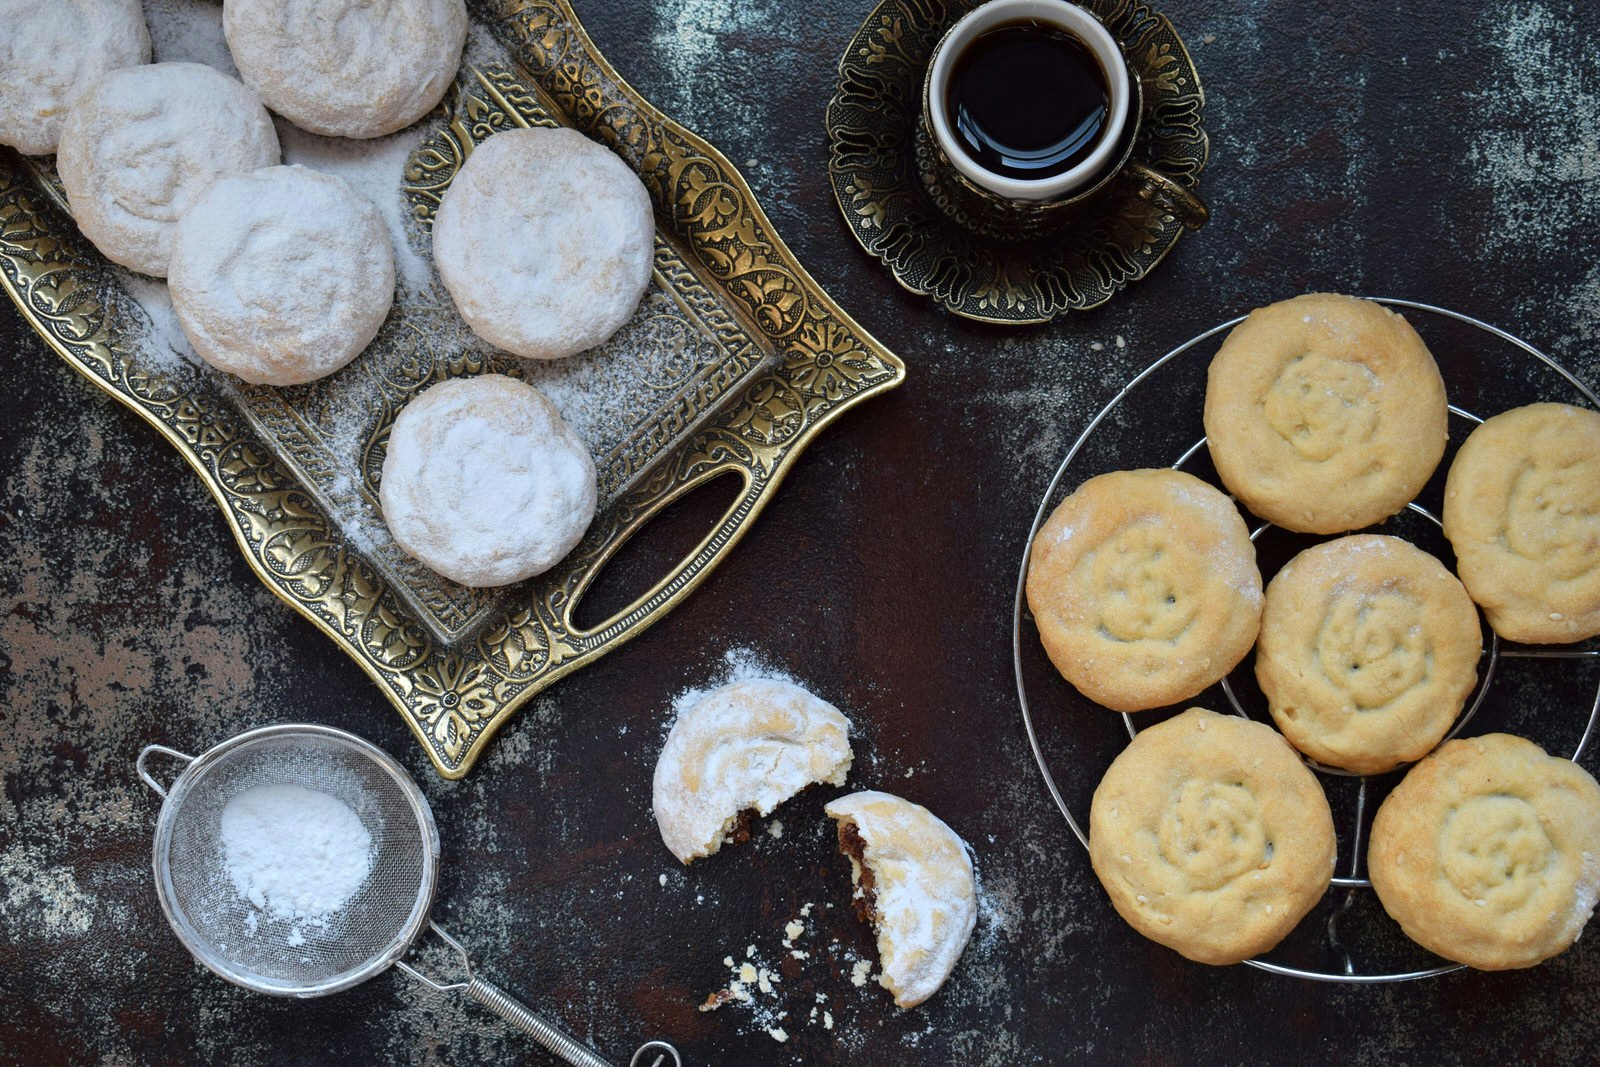 Sesame shortbread kahk cookes with date stuffing from Egypt. Some of the cookies are on a decorative gold tray sprinkled with icing sugar, one is broken in half to show the filling and the rest are on a cooling rack next to a small cup of tea.